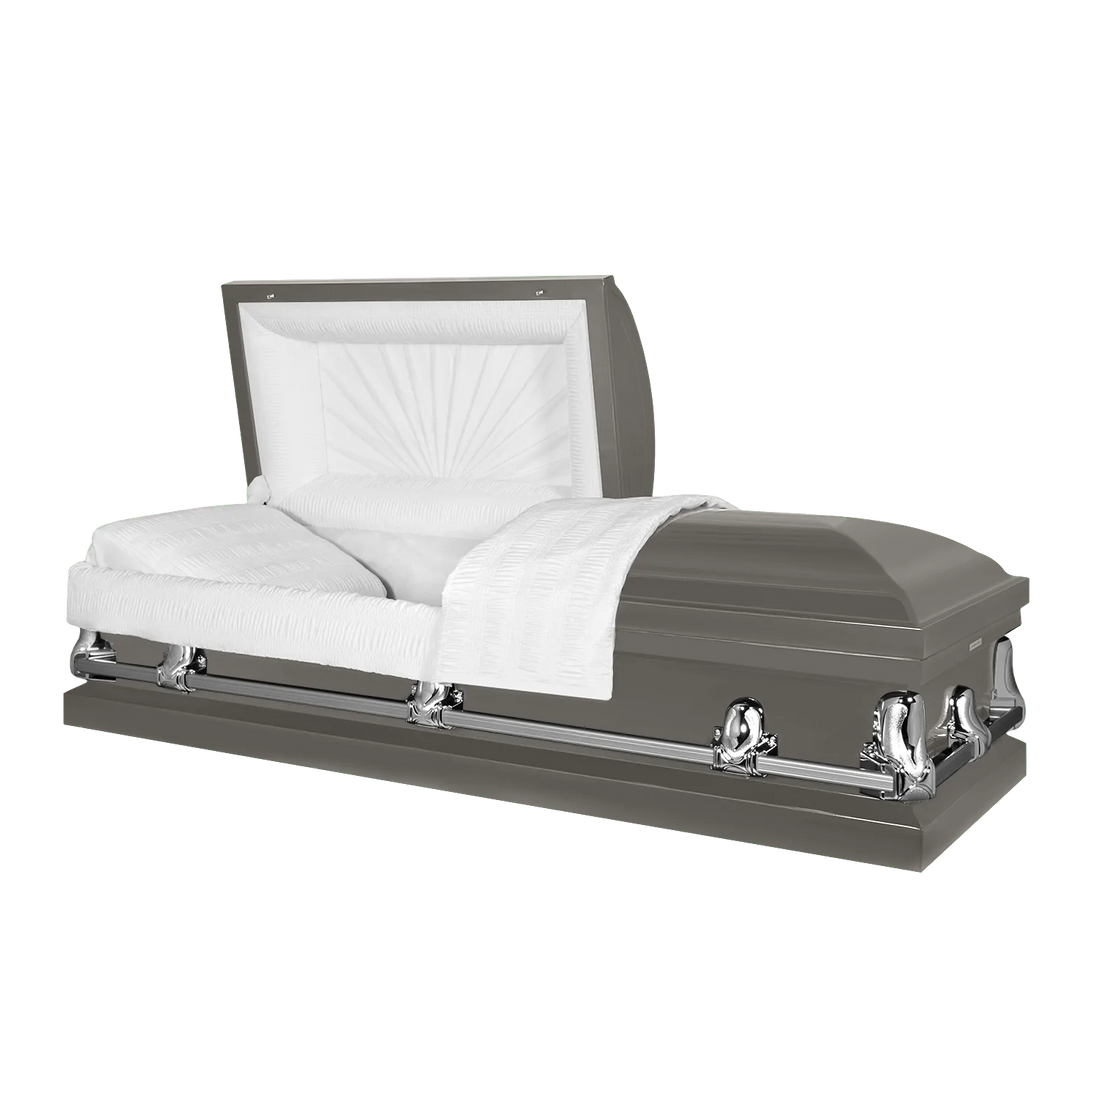 When And How To Buy A Gunmetal Color Casket?